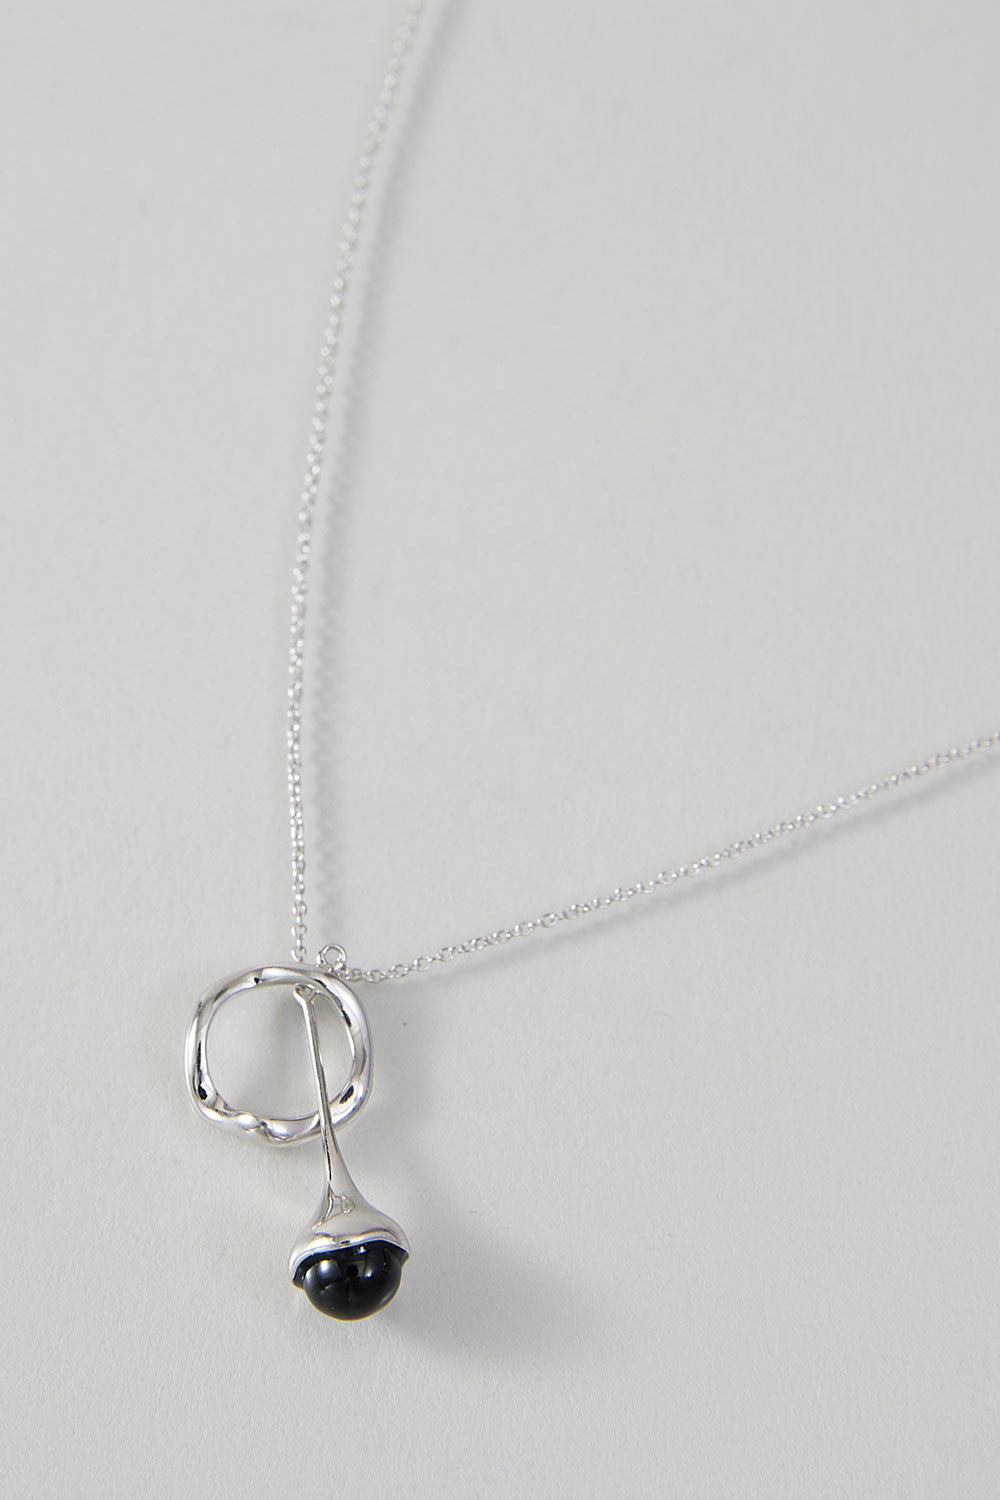 DANGLING STONE NECKLACE